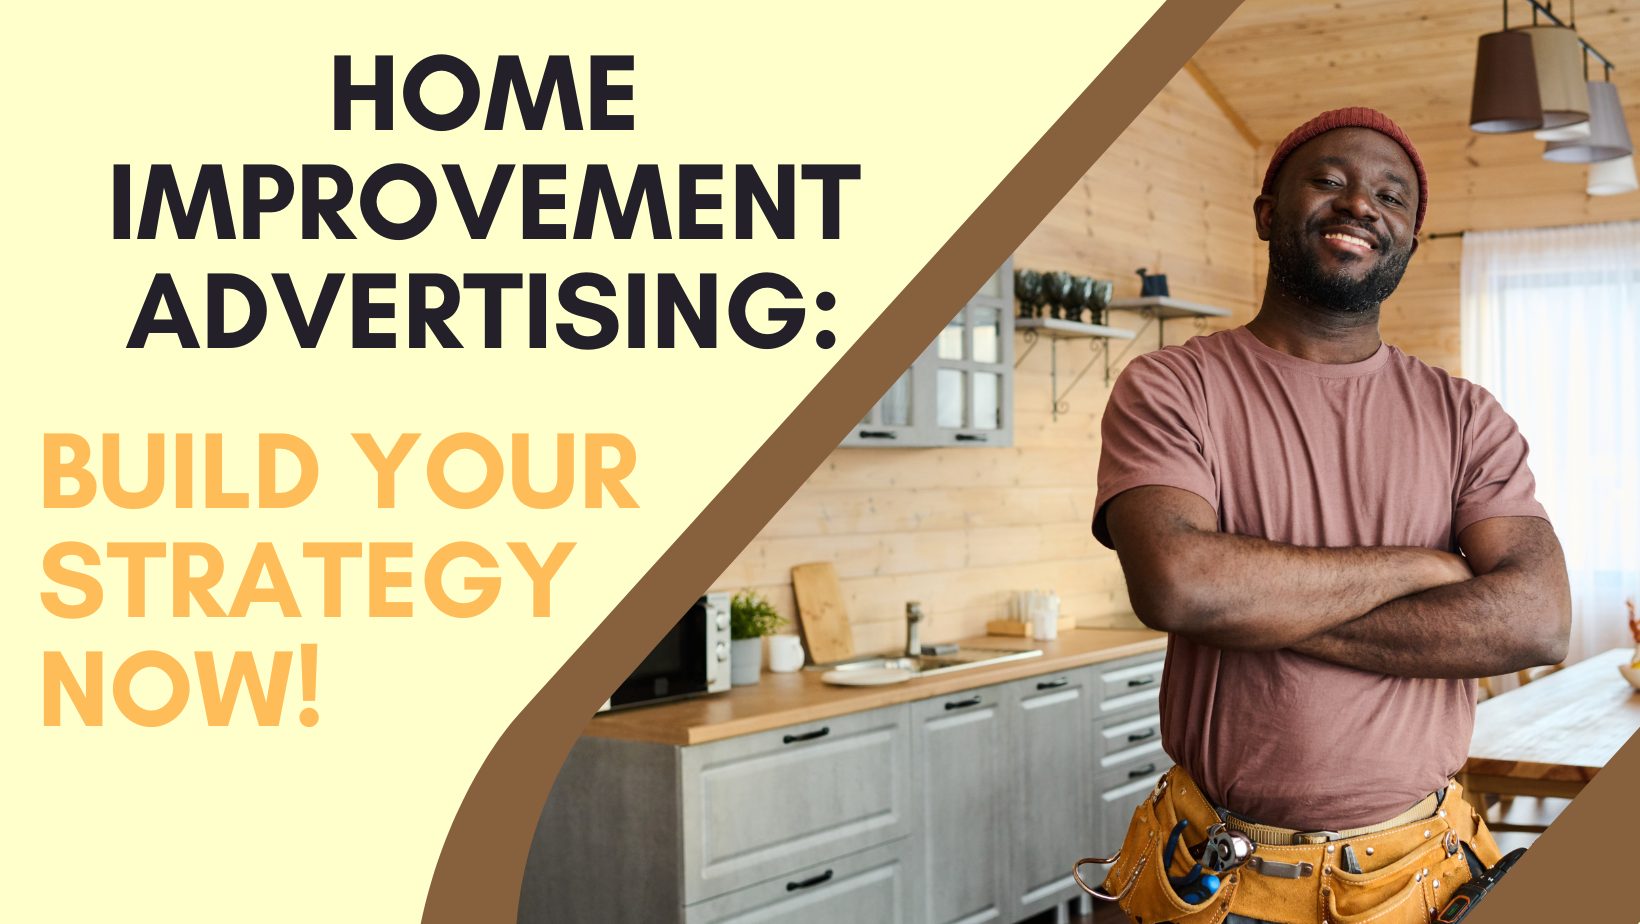 Home improvement advertising: build your strategy now!